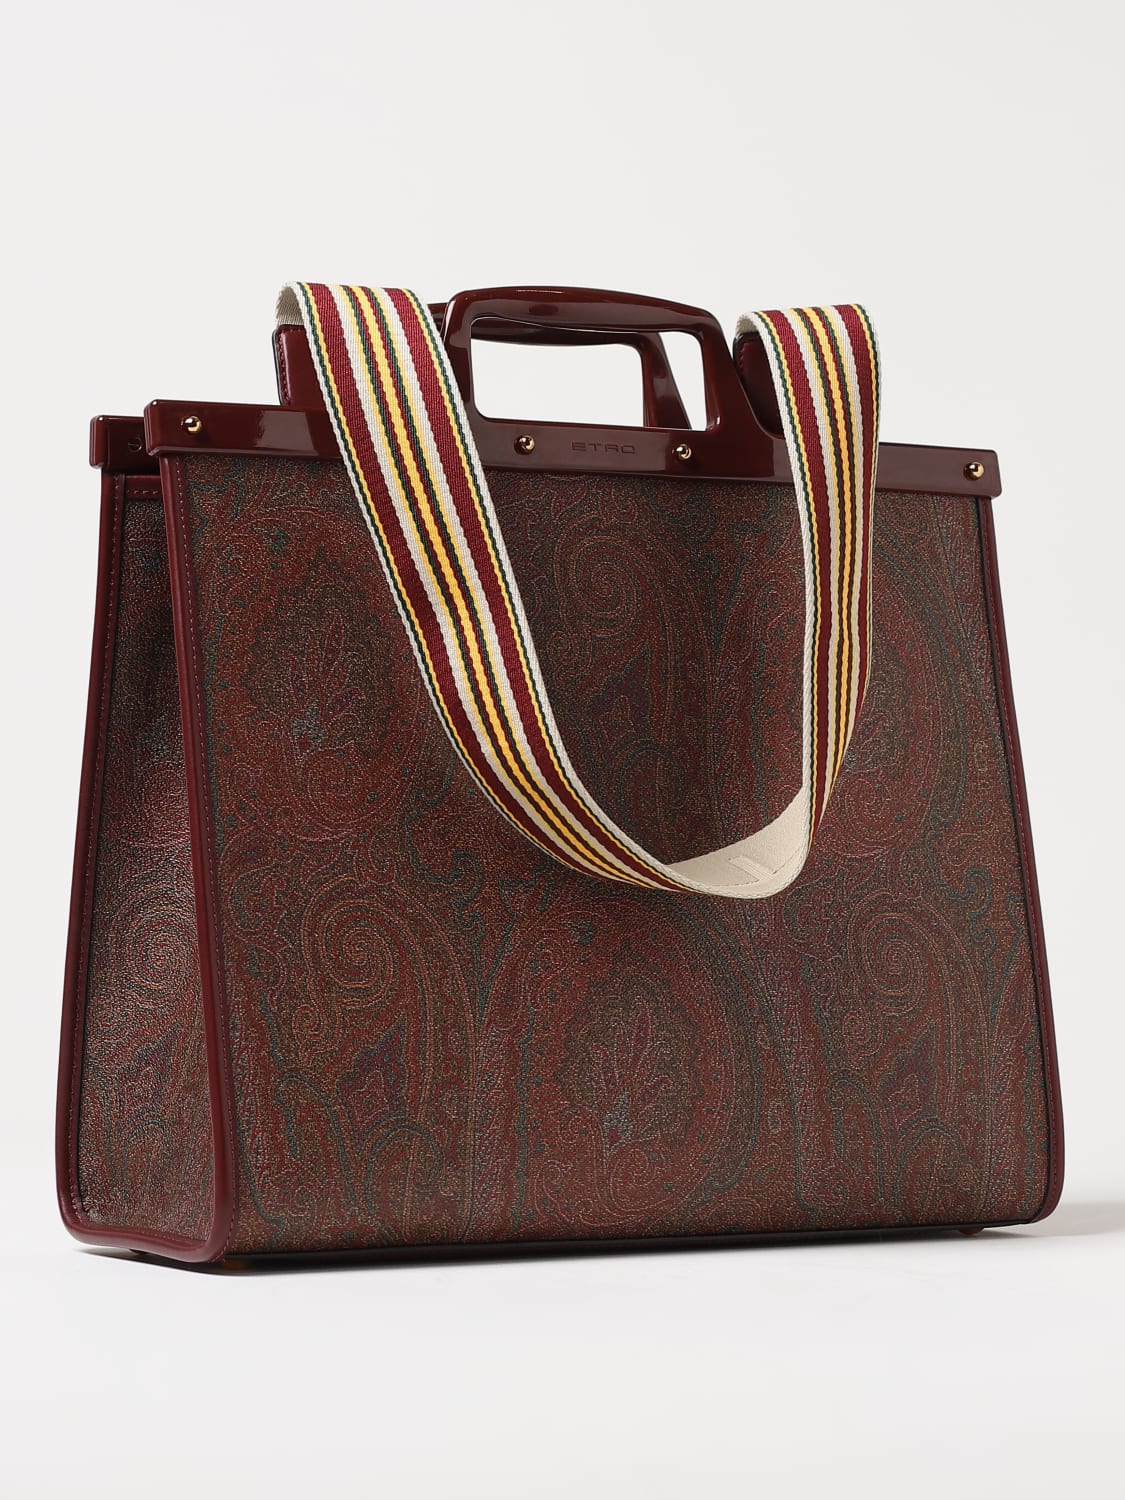 Etro bags for women